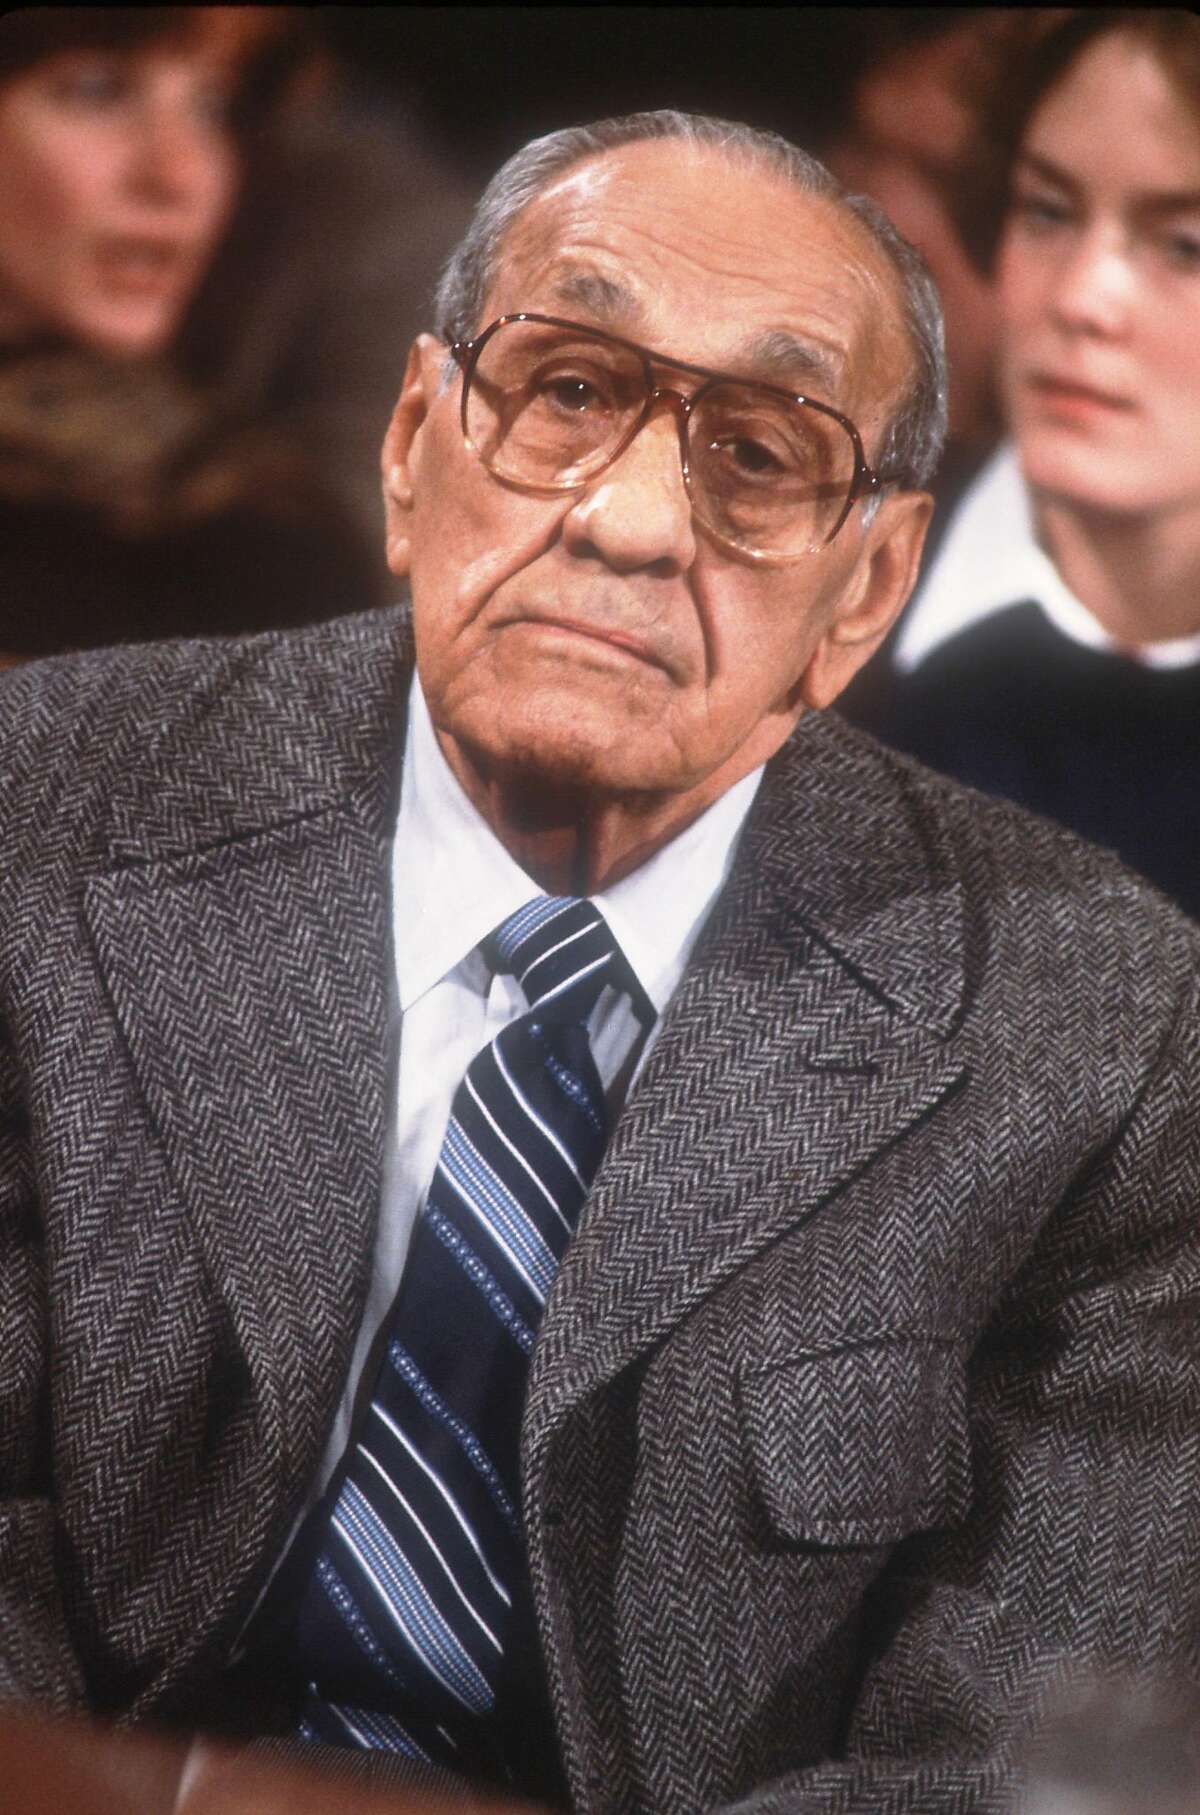 376152 01: Anthony Accardo testifies before the Senate Government Affairs Committee November 17, 1984 in Washington, DC. Accardo is being investigated on labor racketeering within the Hotel Employees and Restaurant Employees International Union. (Photo by Cynthia Johnson/Liaison)